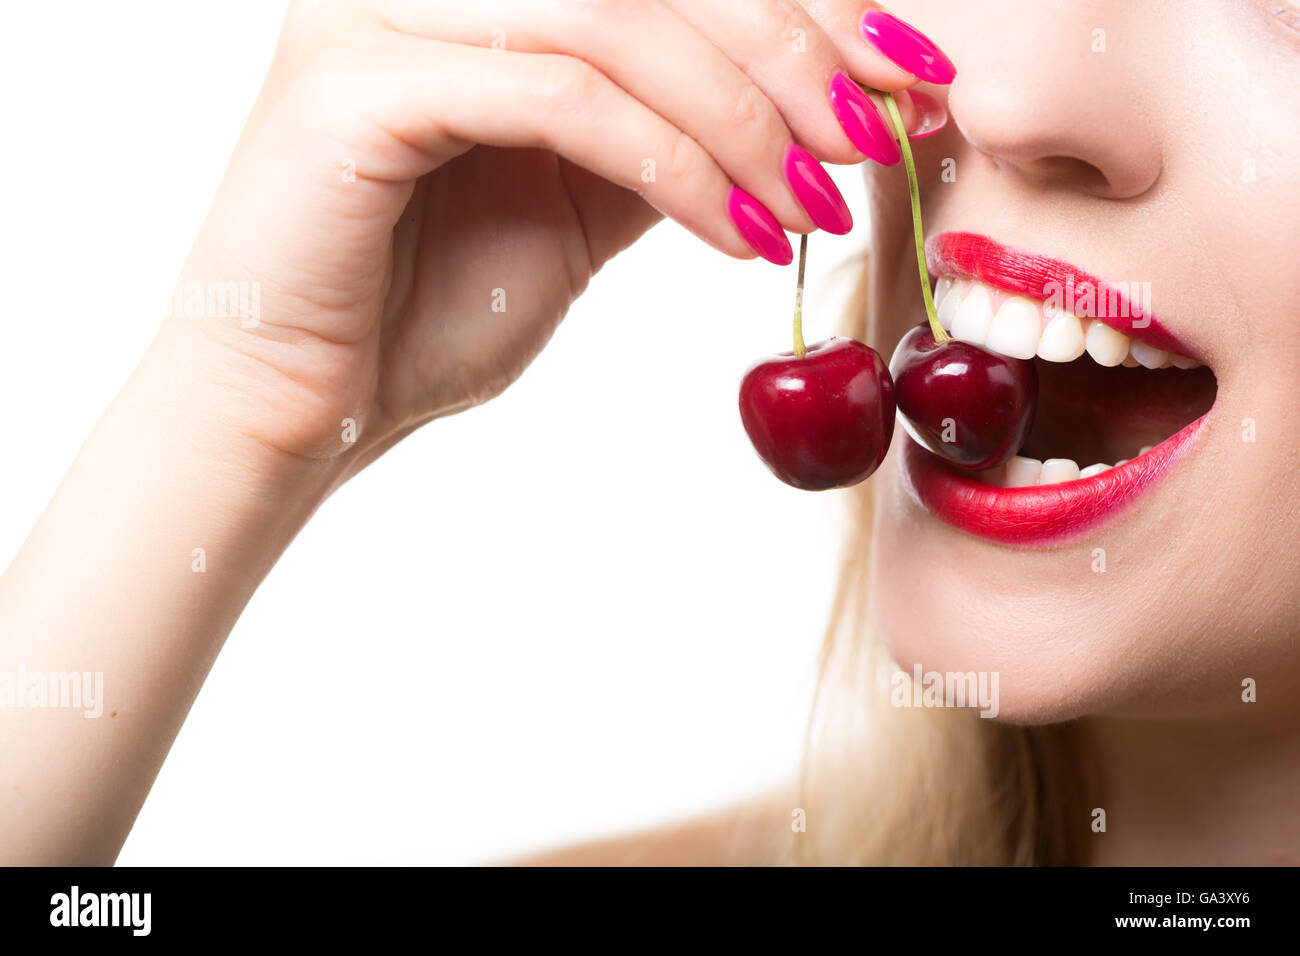 girl's lips and tongue licking two berries Stock Photo